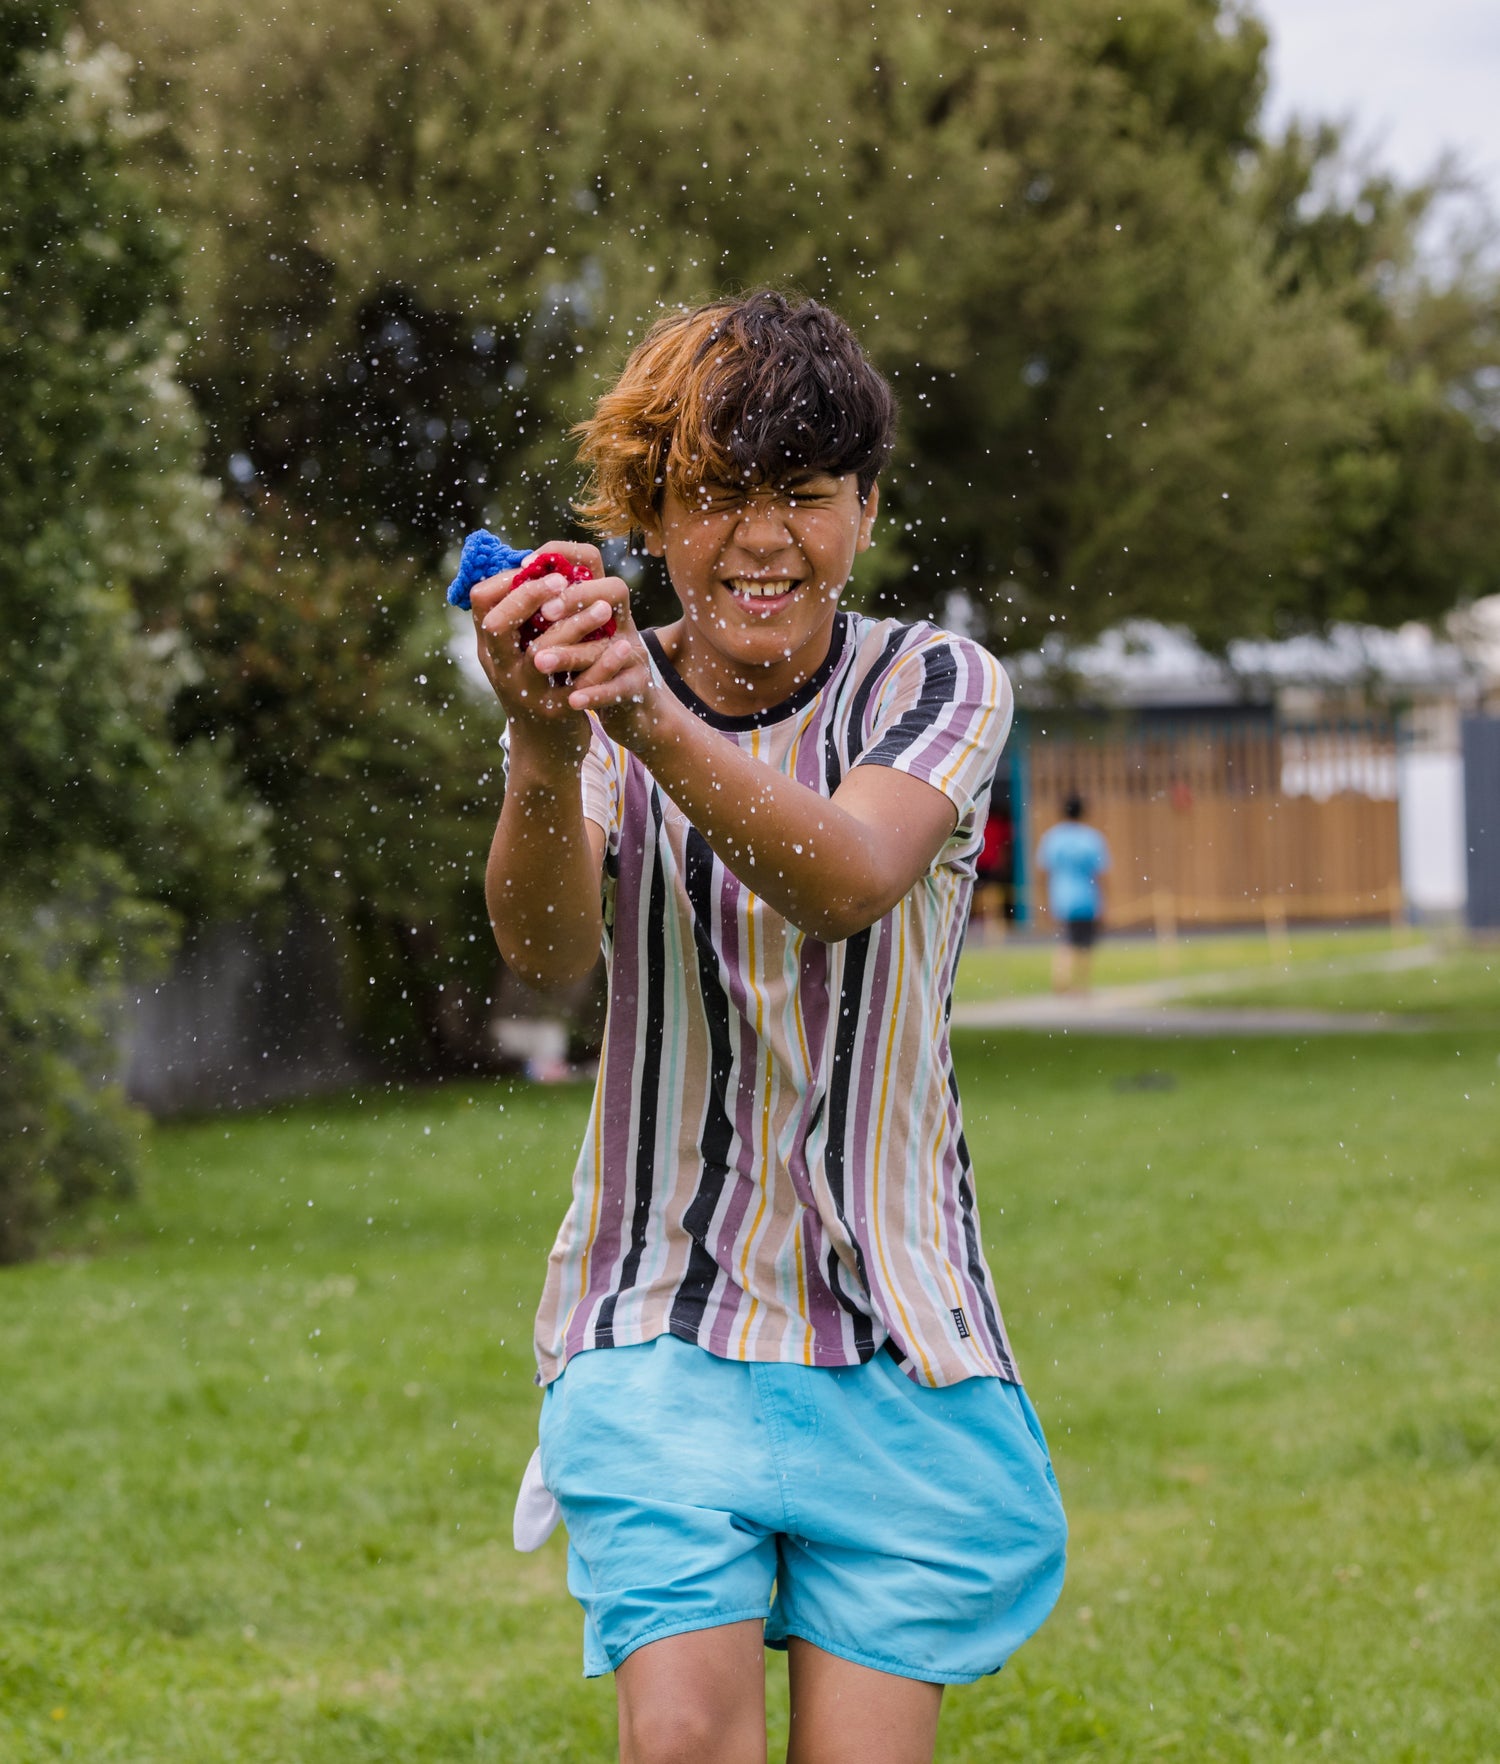 A 12 year old boy standing on grass and catching EcoSplat Reusable Water Balloon and being splashed with water. His eyes are shut and he is smiling.